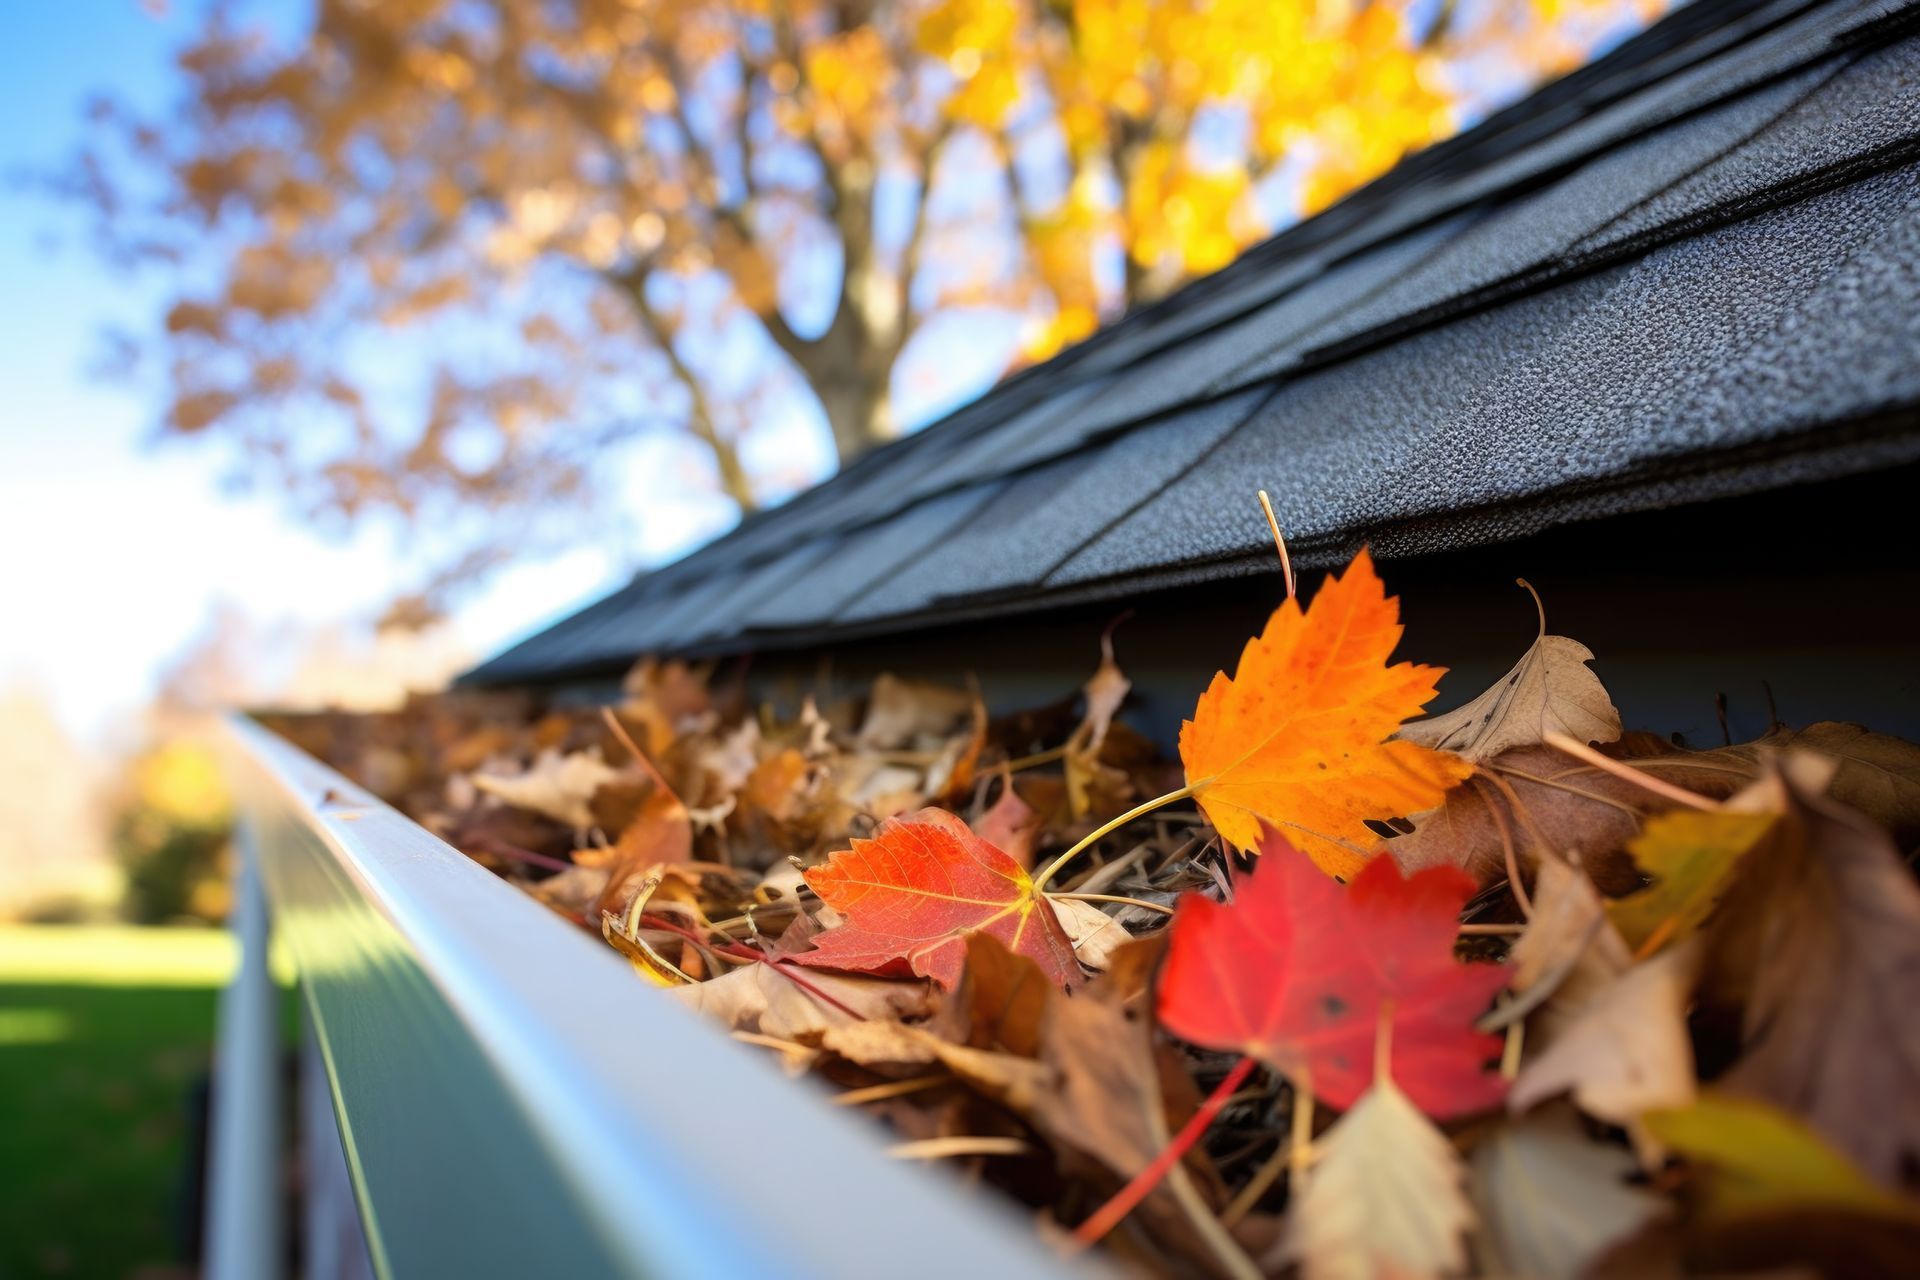 A gutter filled with leaves and a tree in the background.